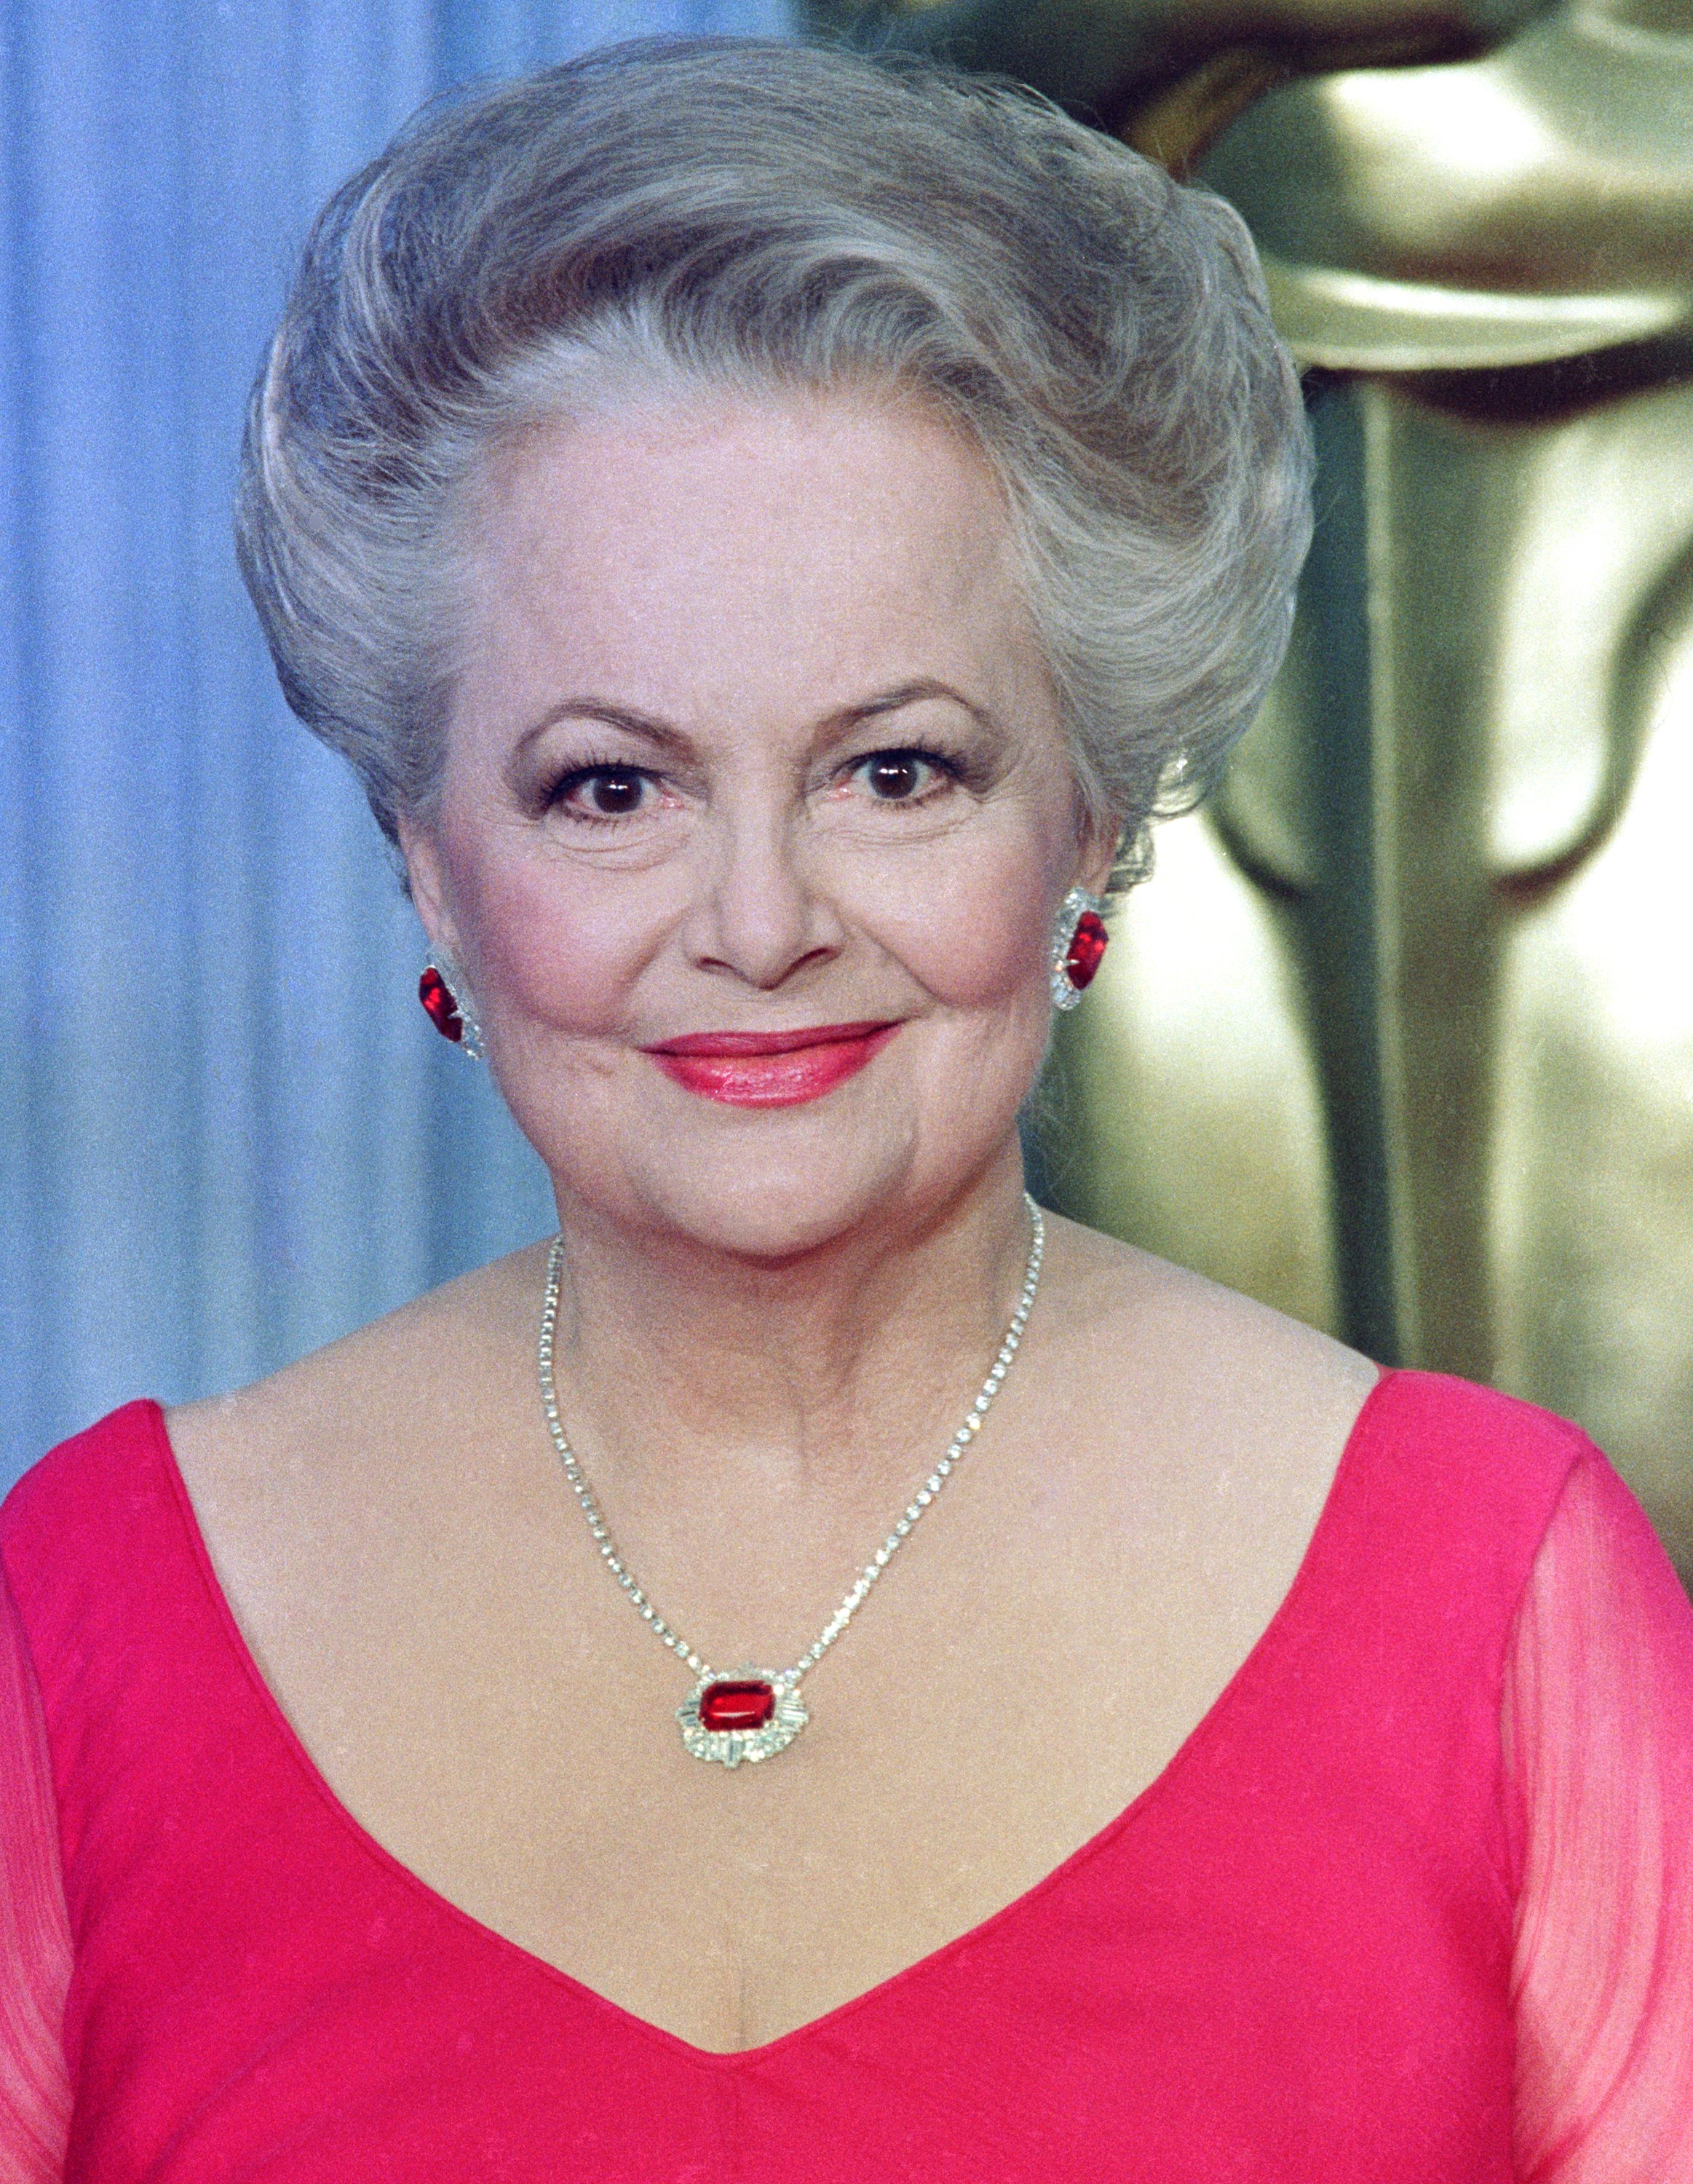 Olivia de Havilland backstage at the Academy Awards show at the Shrine Auditorium, April 11,1988 in Los Angeles, California | Source: Getty Images